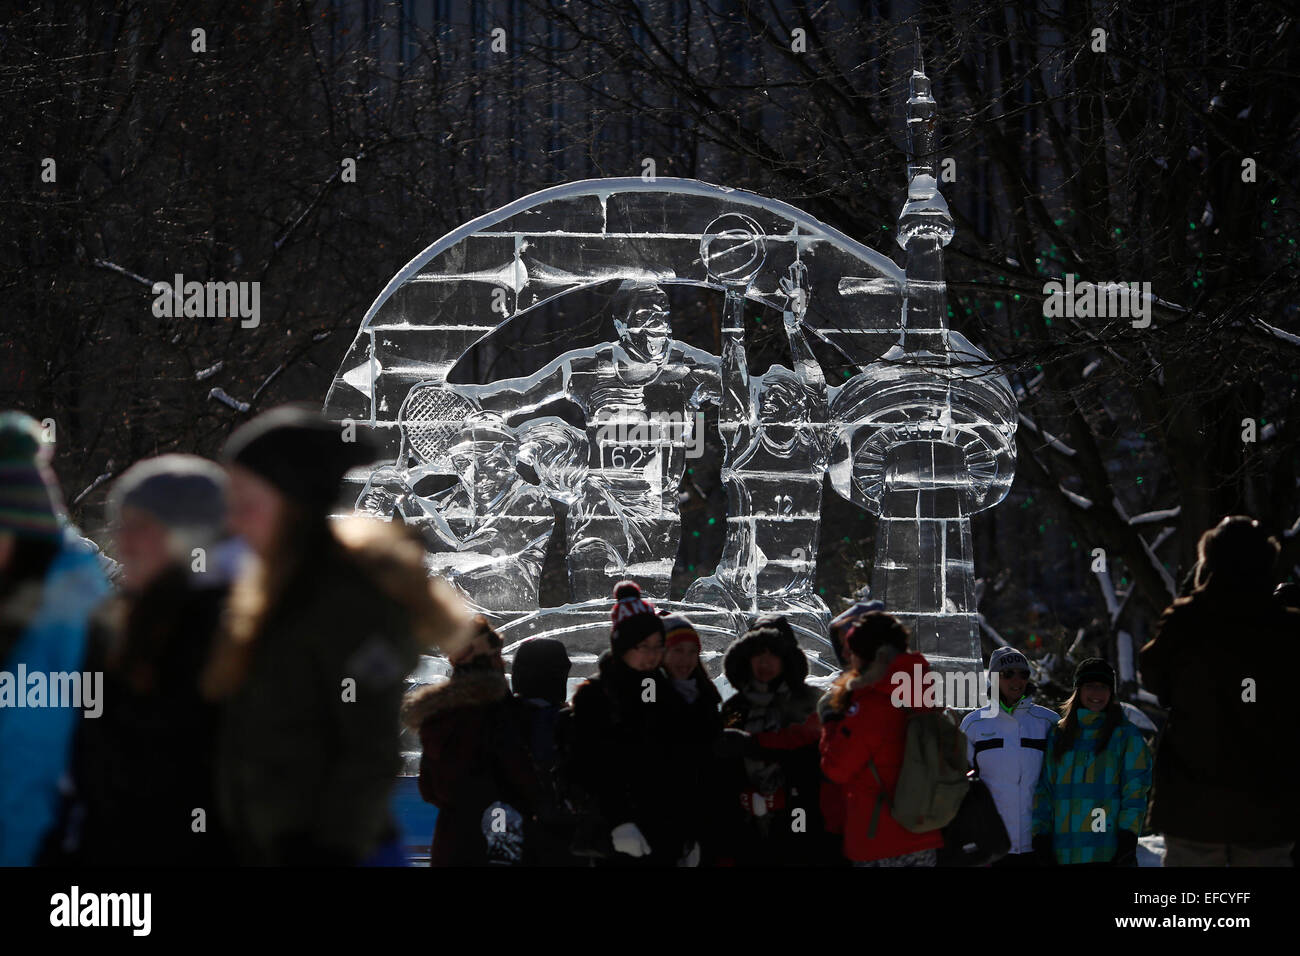 Ottawa, Ottawa. 31st Jan, 2015. An ice sculpture commemorating the upcoming Toronto 2015 Pan Am & Parapan American Games makes a prominent backdrop for visitors to Confederation Park on the opening day of Winterlude, in Ottawa, Canada on Jan. 31, 2015. Winterlude, the National Capital Region's annual celebration of winter, attracts thousands of tourists and locals alike. Credit:  David Kawai/Xinhua/Alamy Live News Stock Photo